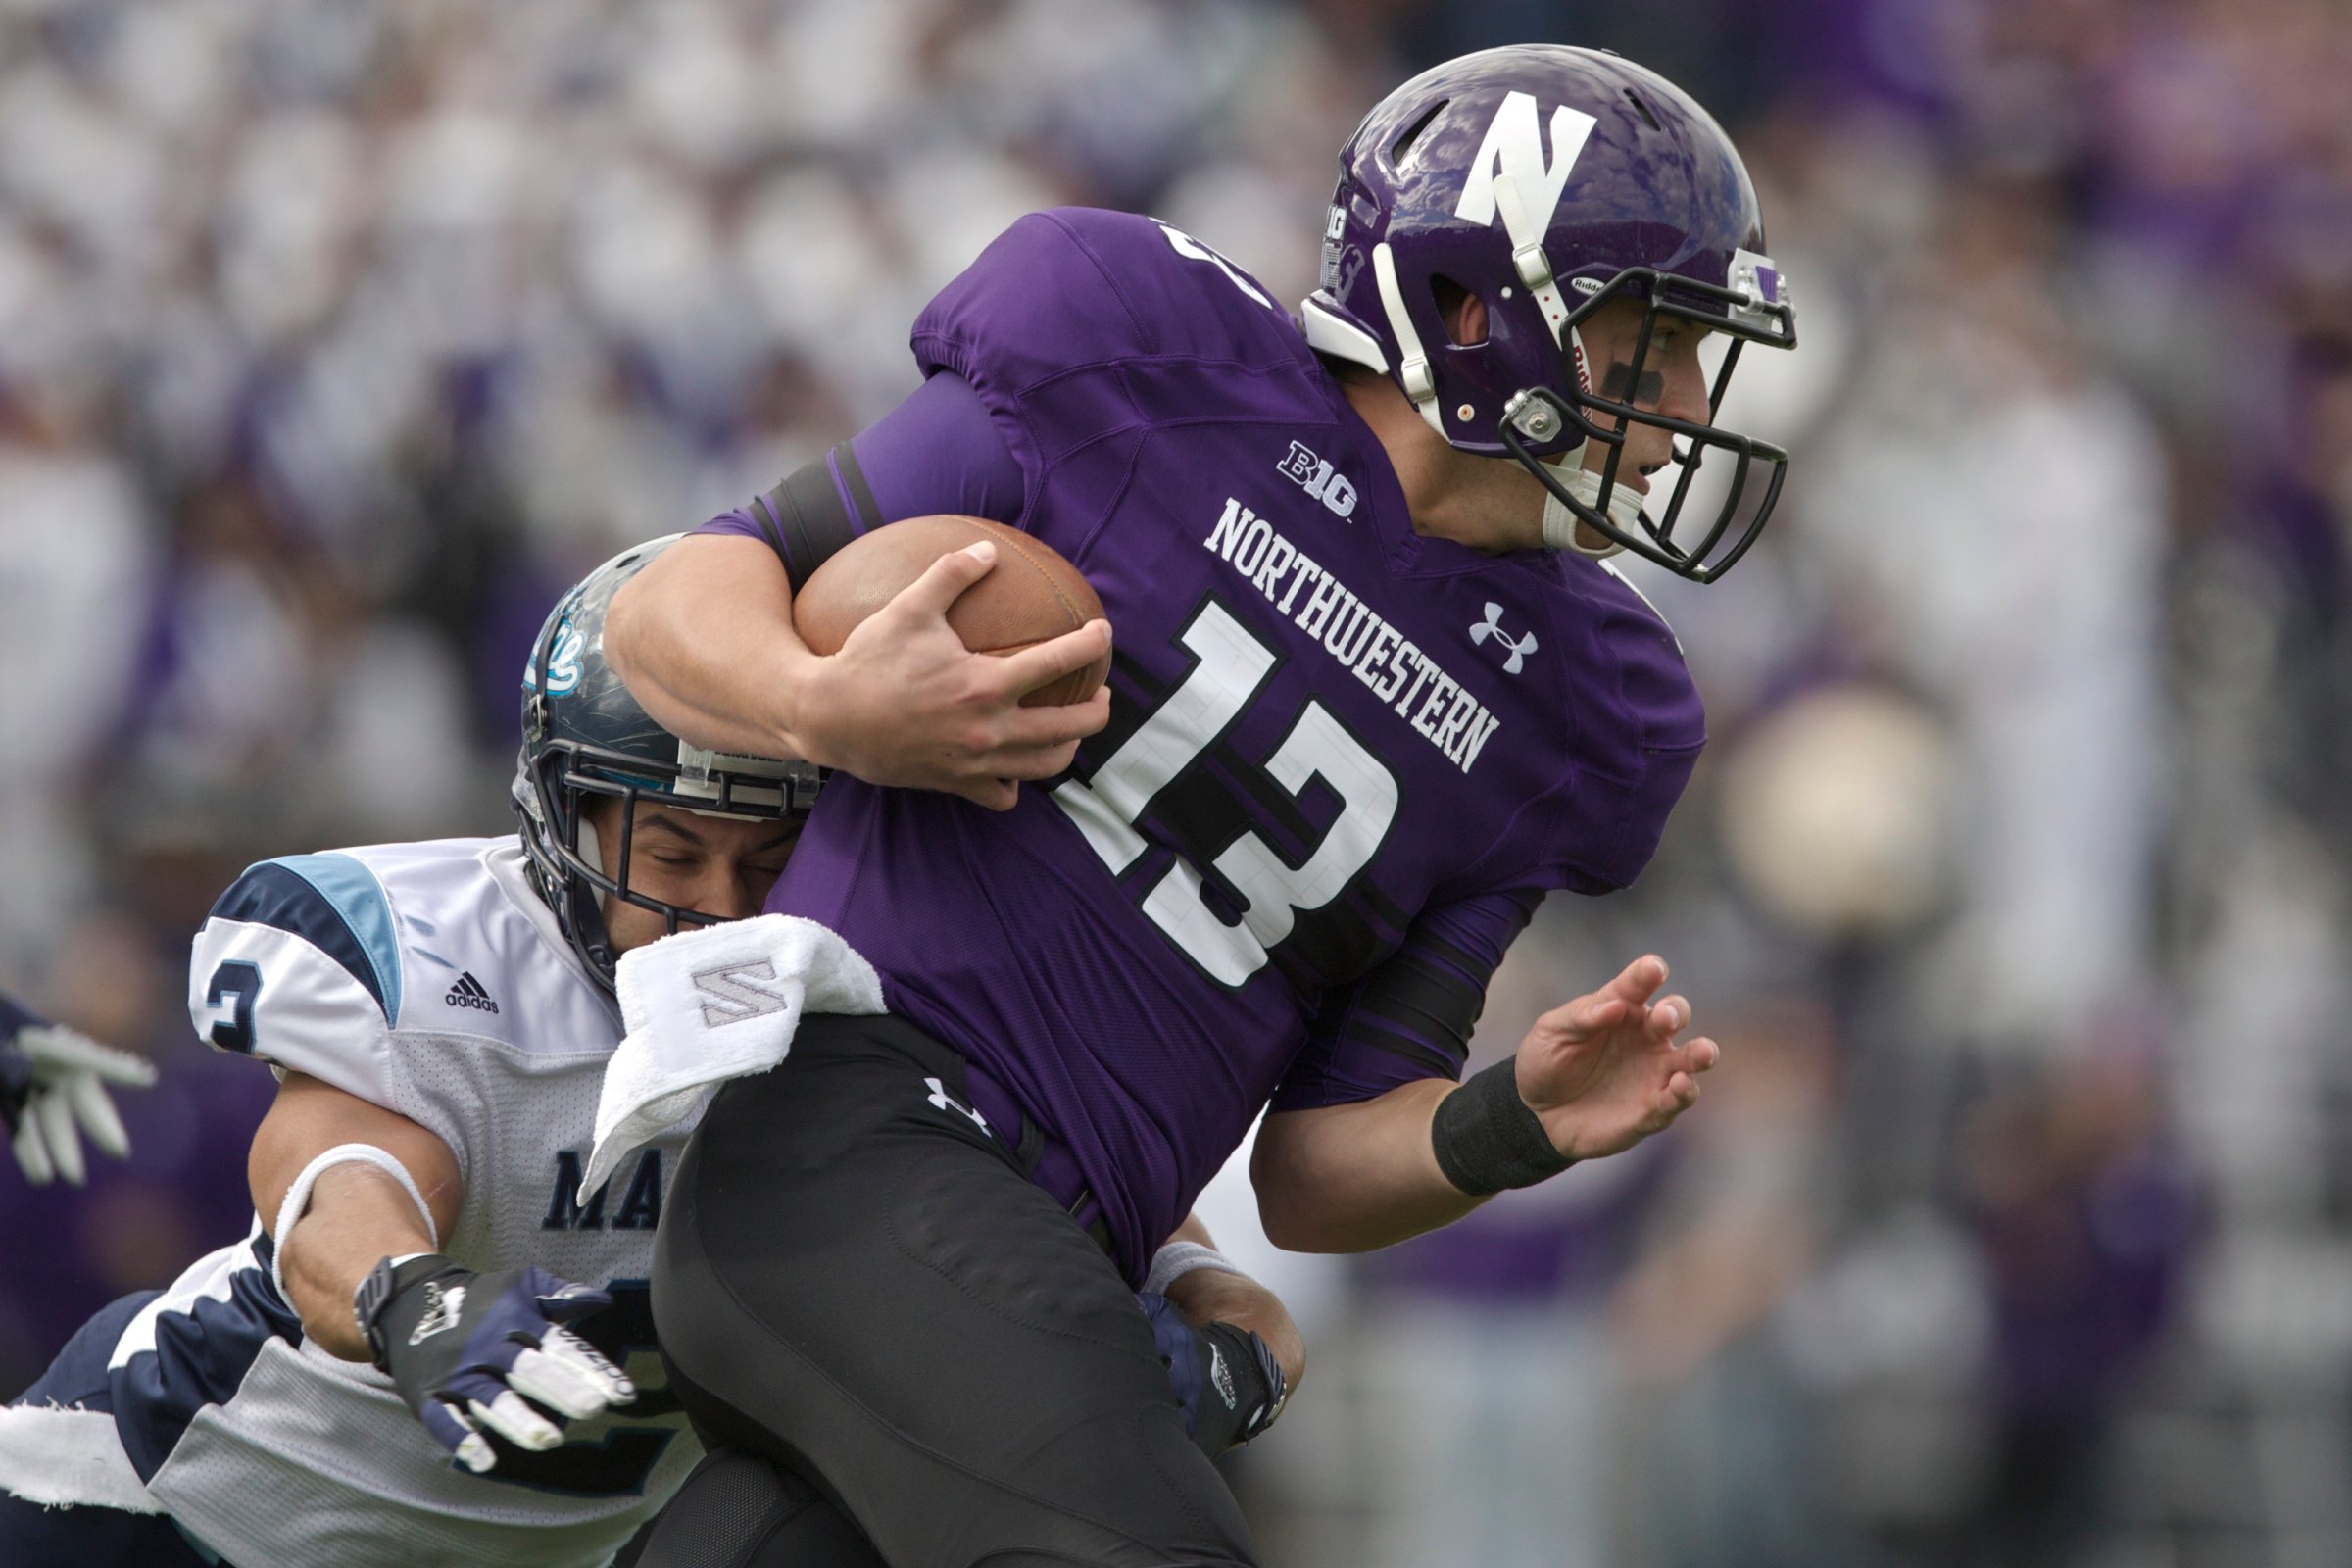 Cabrinni Goncalvesof the Maine Black Bears tackles Trevor Siemianof the Northwestern Wildcats during their college football game at Ryan Field on September 21, 2013 in Evanston, Illinois.